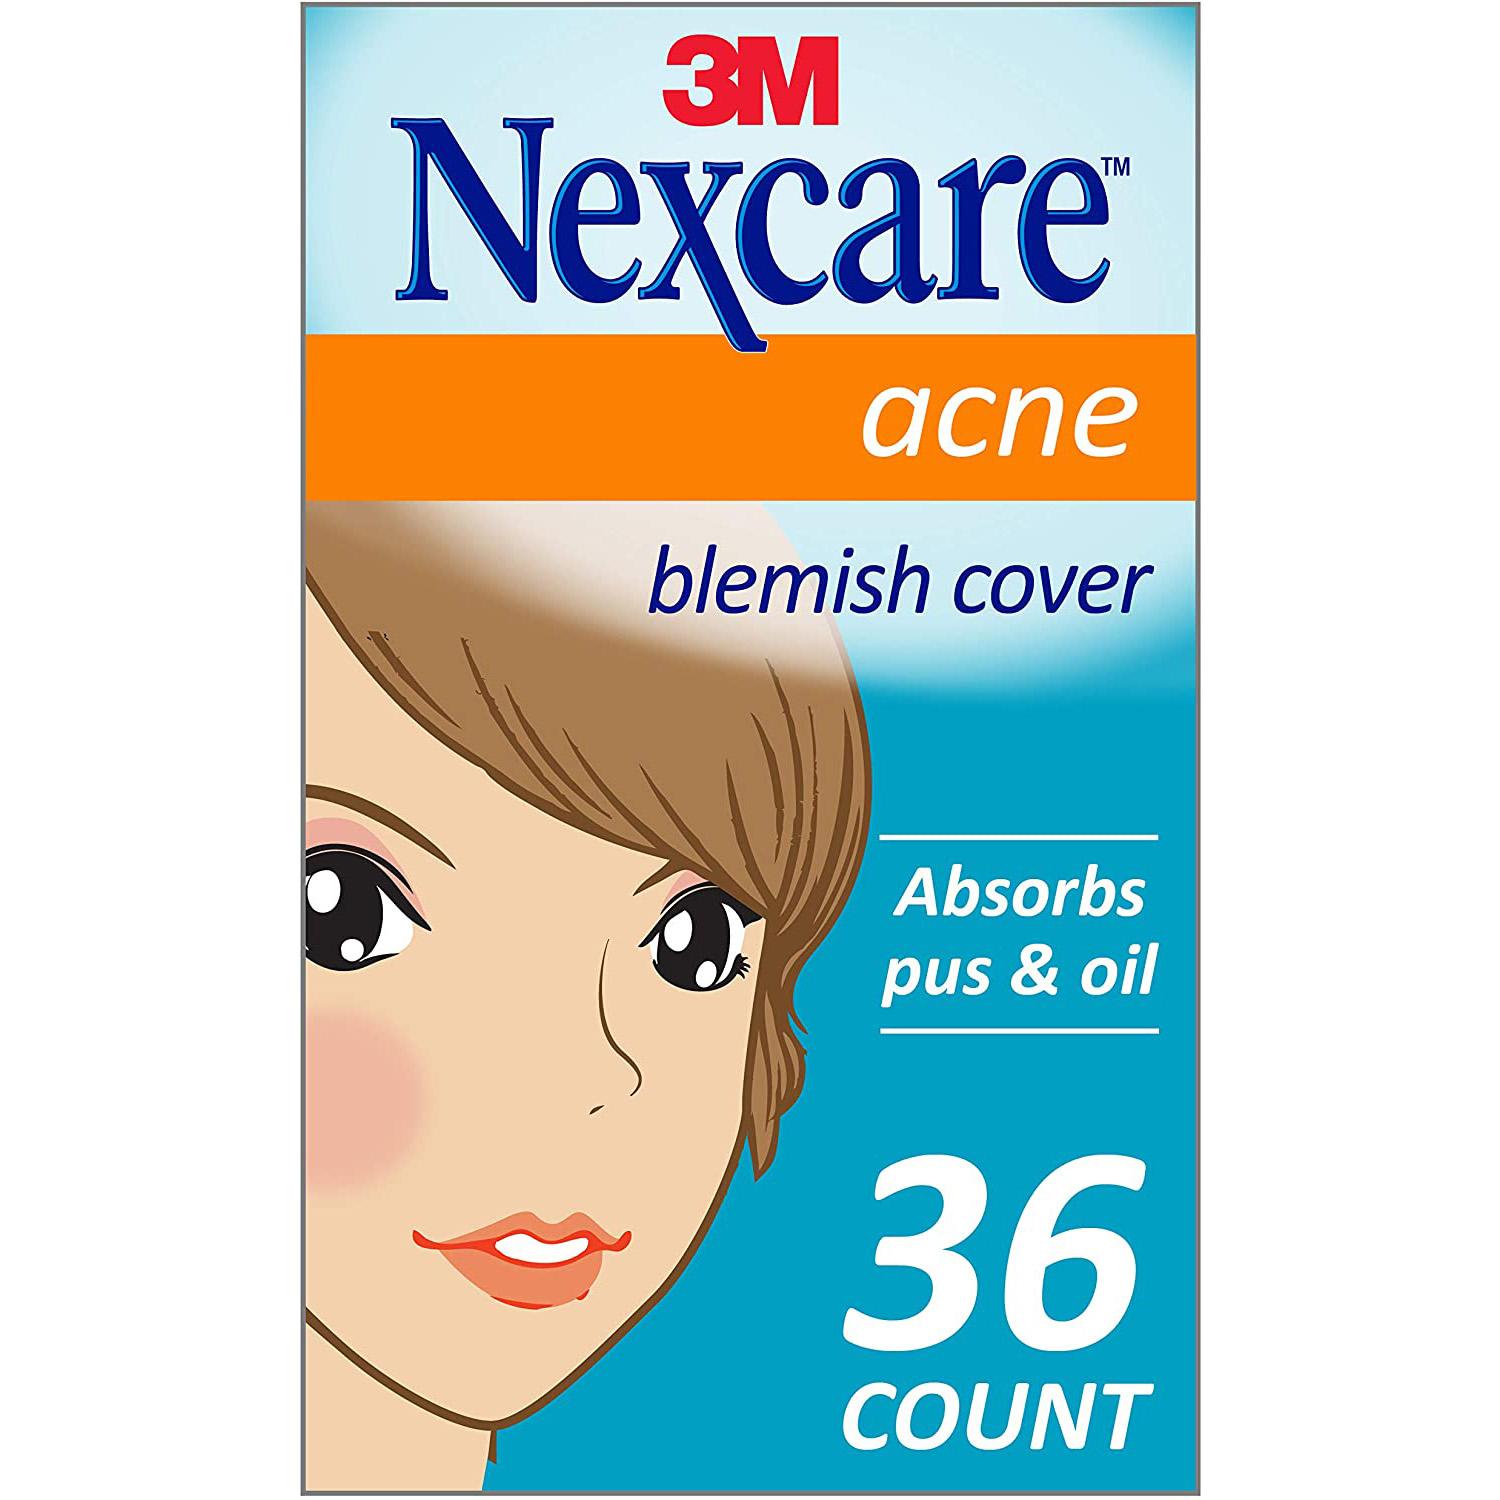 36 Nexcare Absorbing Acne Covers for $3.97 Shipped